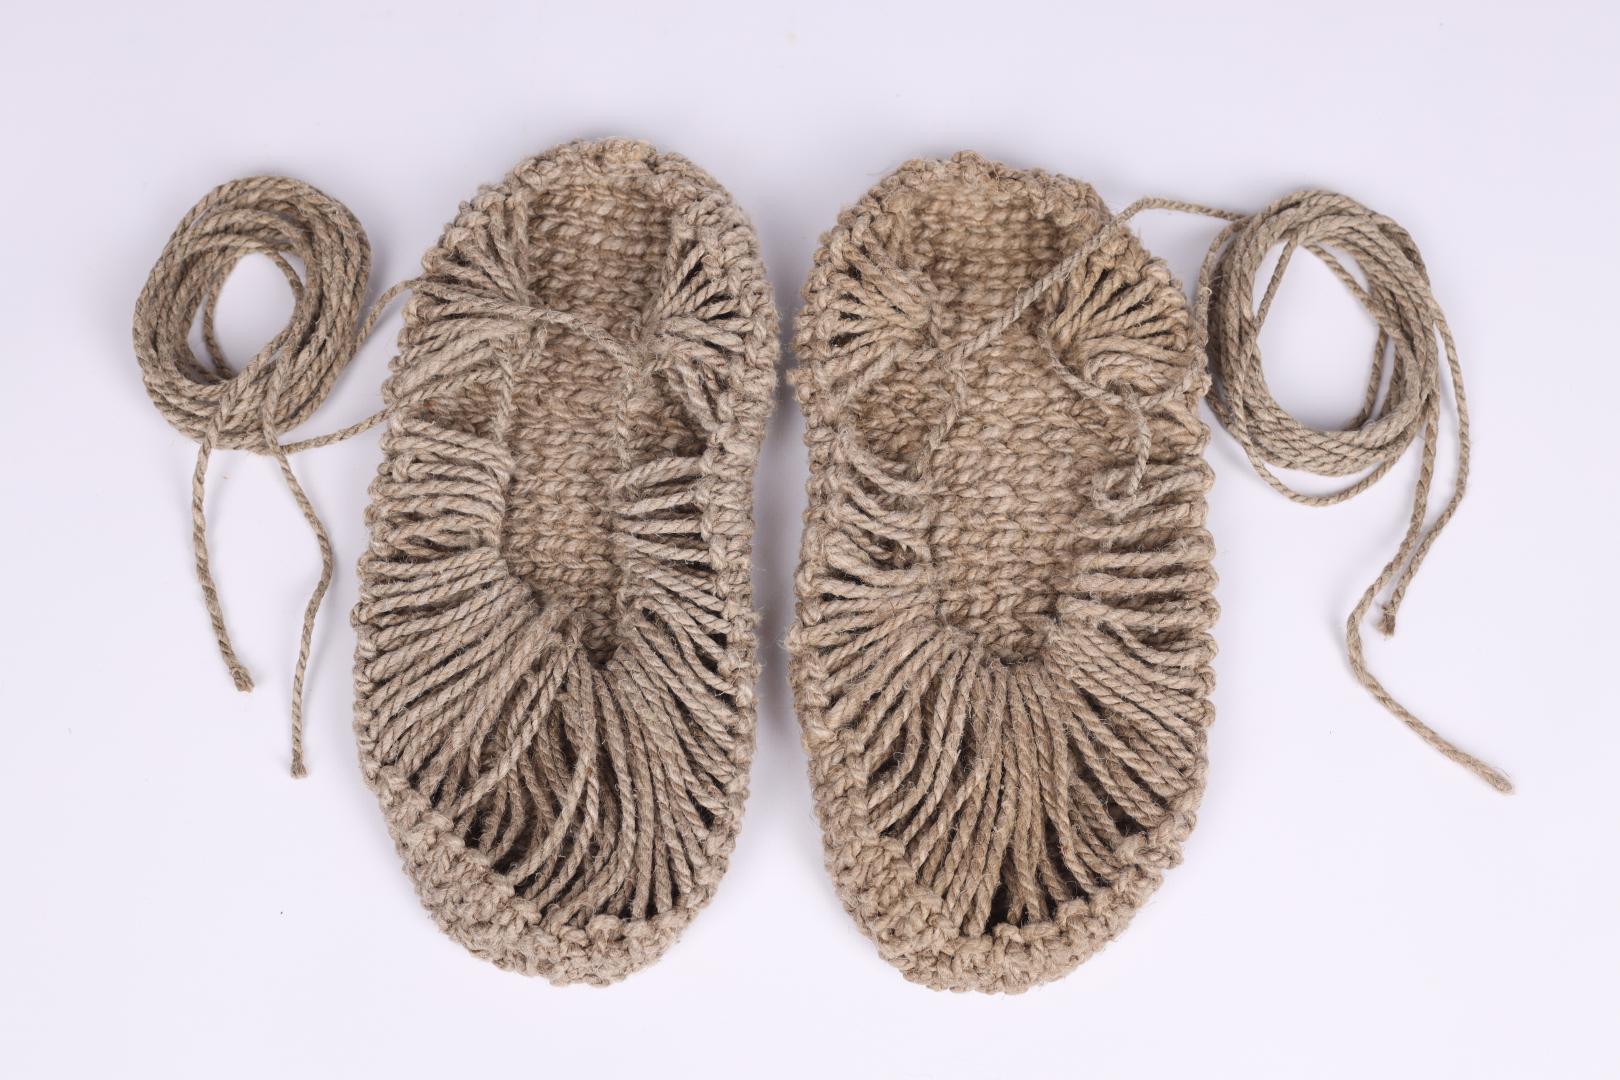 Postoly (wickerwork boots) made of linen cord